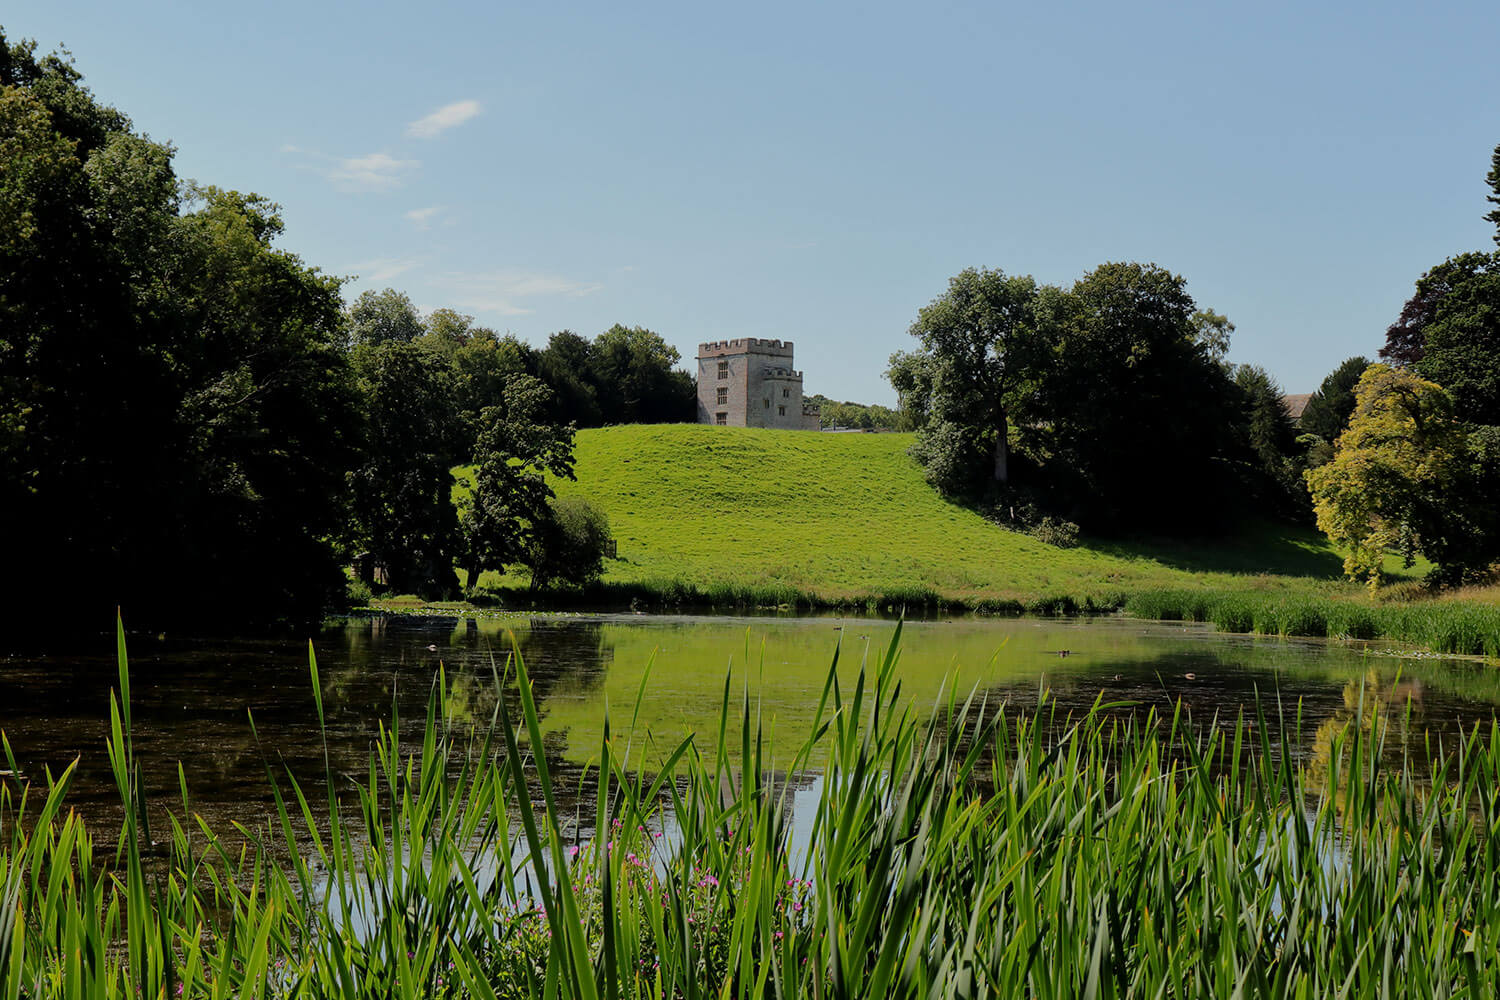 View of the Newton Park castle looking across the lake from the dam